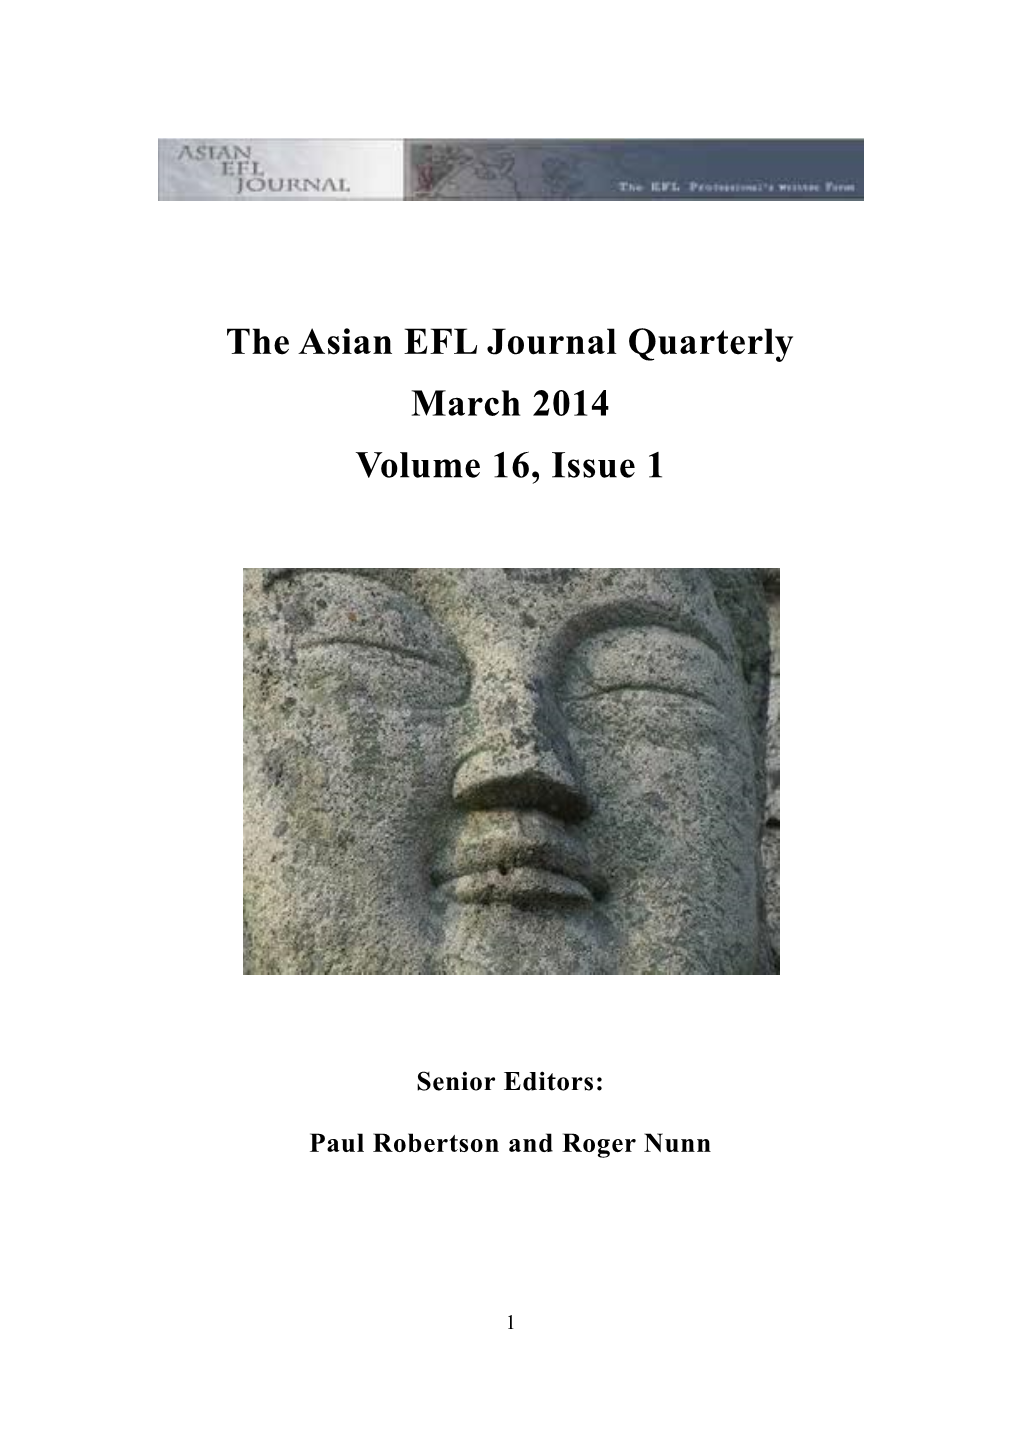 The Asian EFL Journal Quarterly March 2014 Volume 16, Issue 1